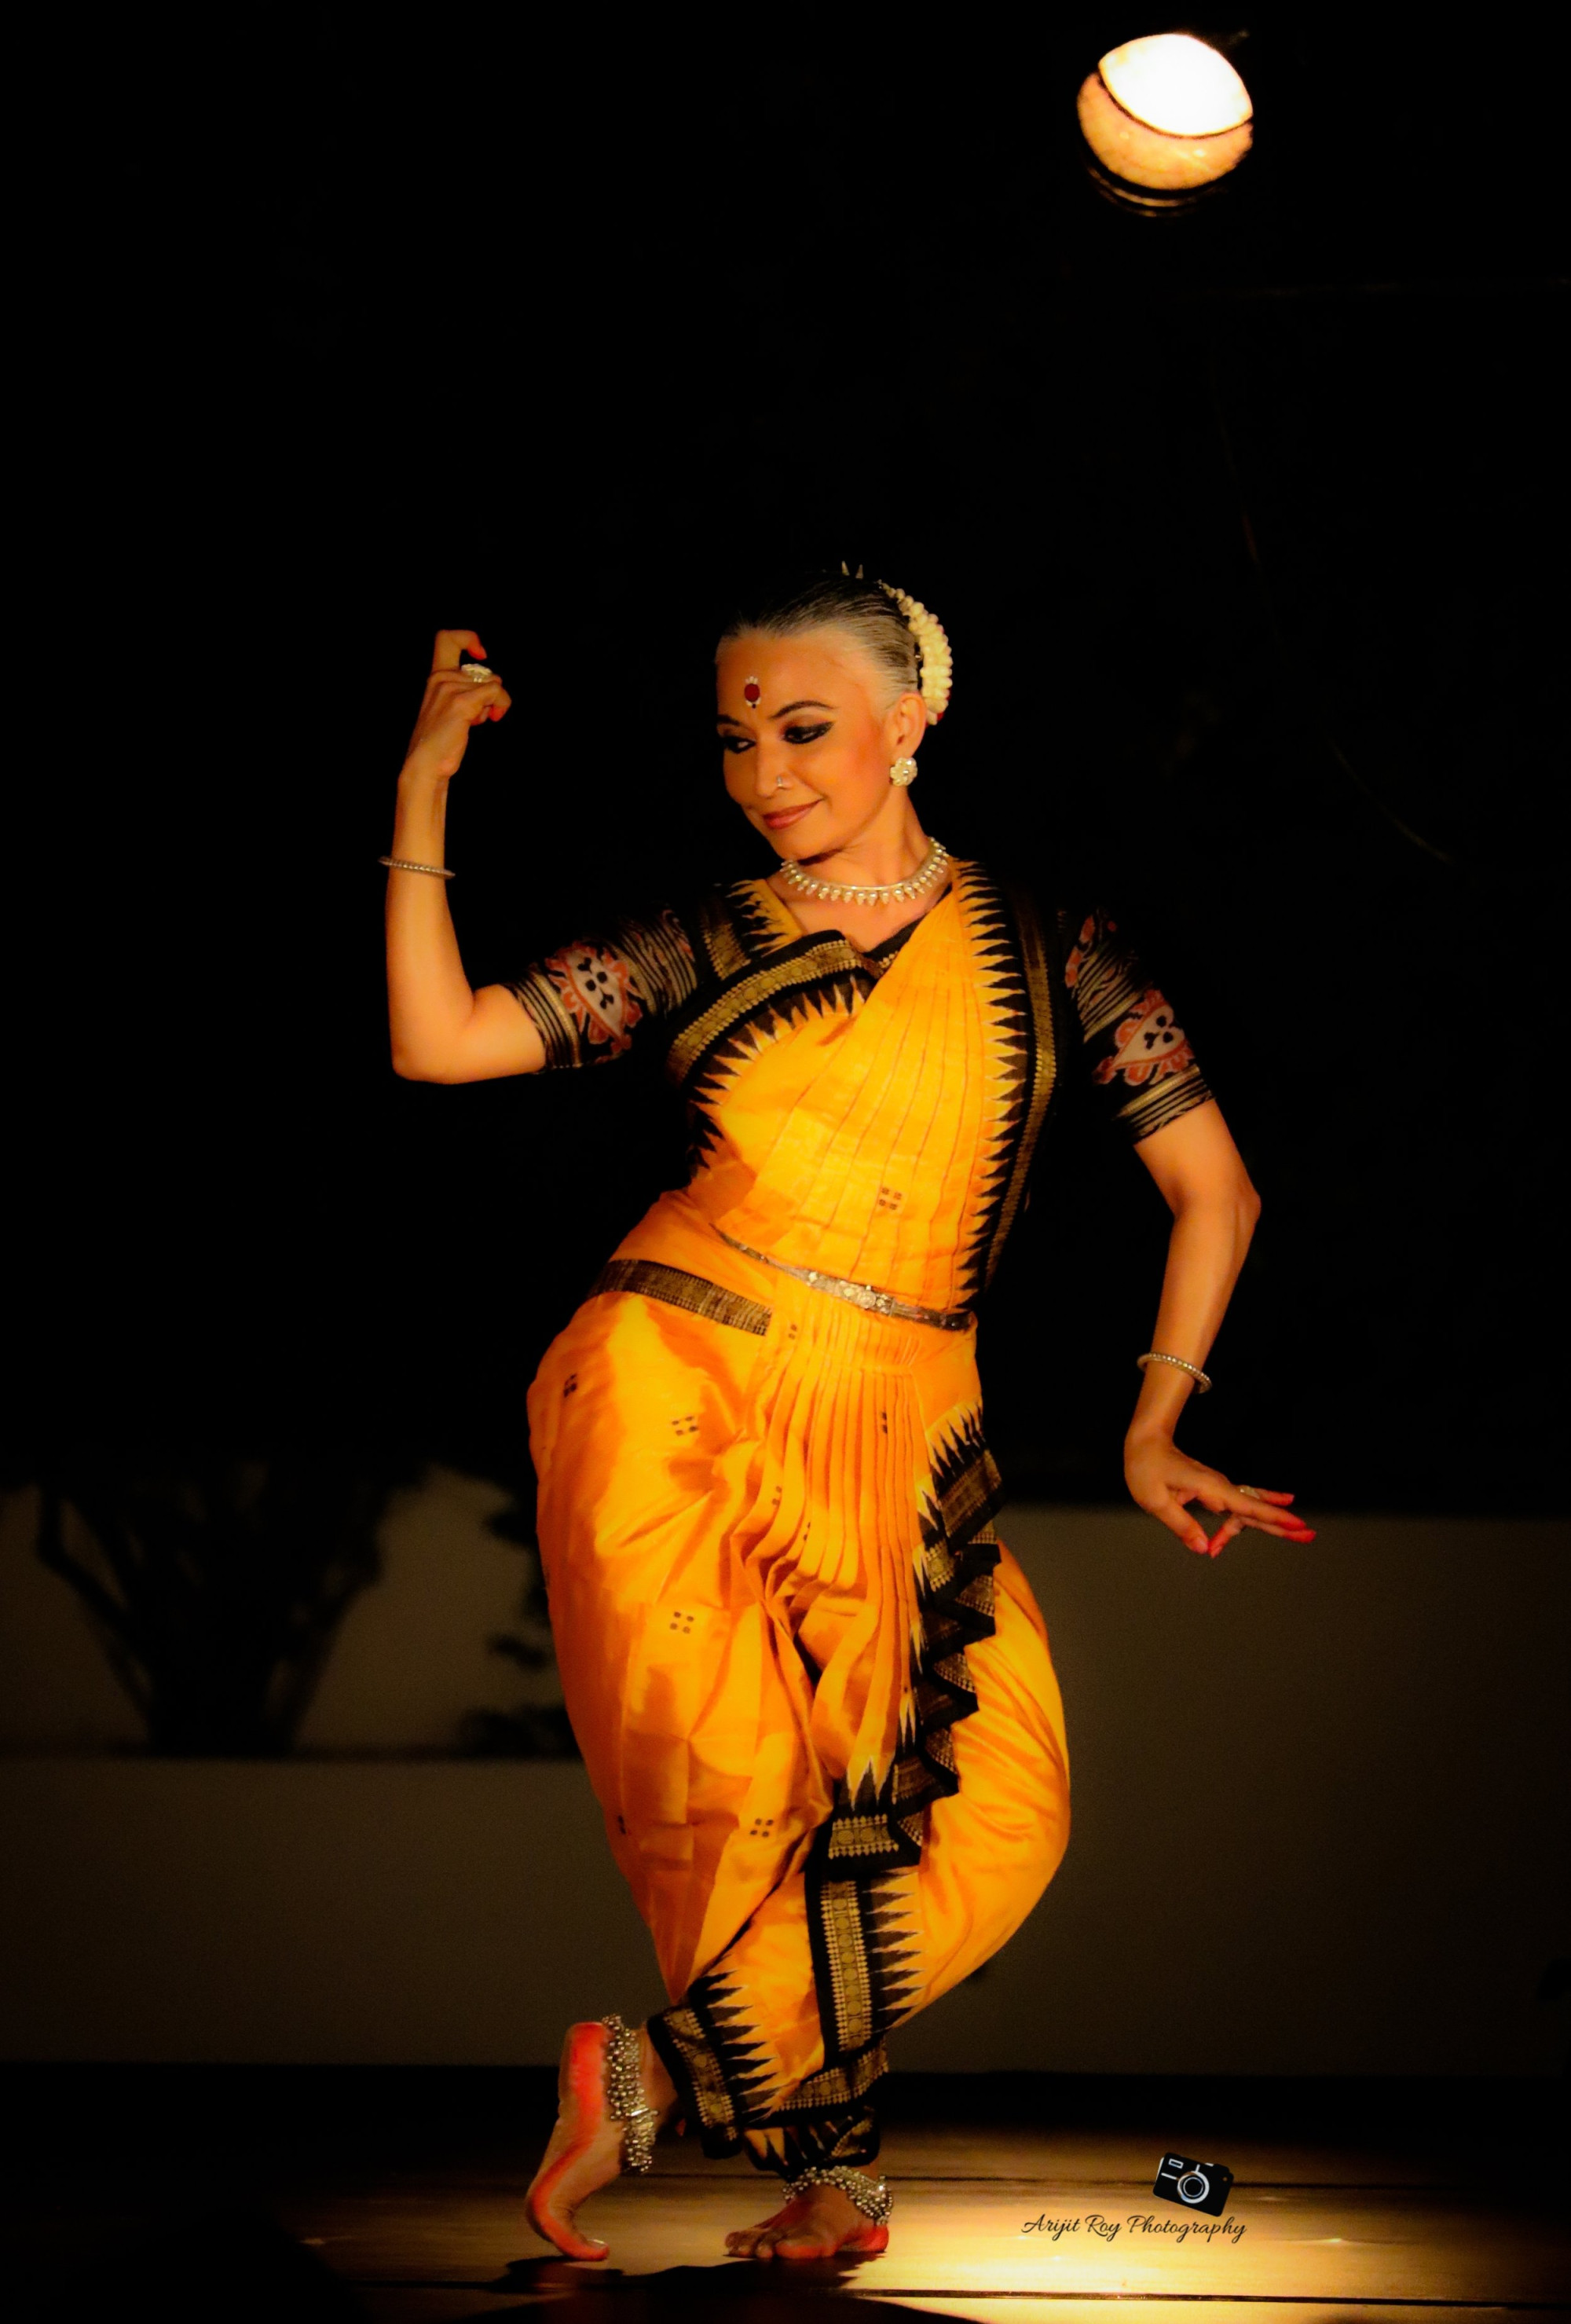 UCLA Department of Worlds Arts and Cultures/Dance Presents: 		 A Public Talk by Choreographer Bijayini Satpathy